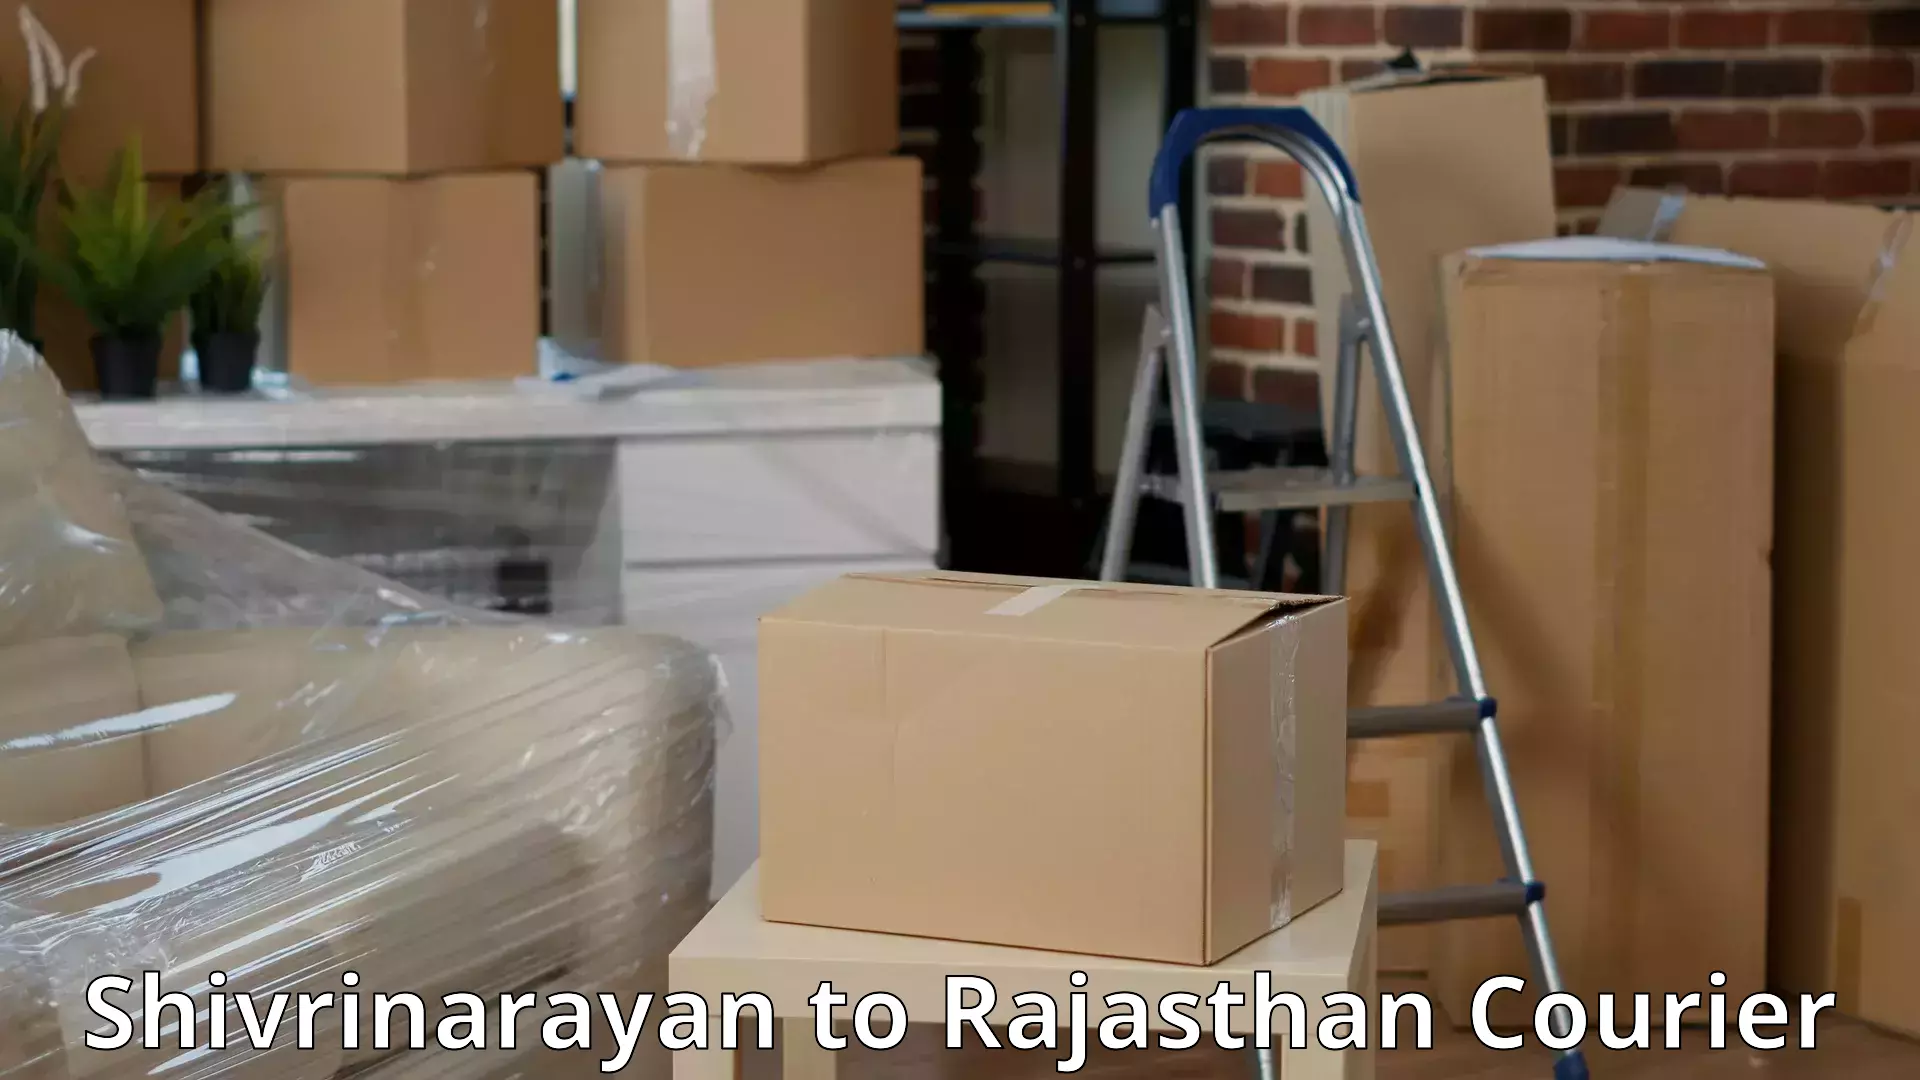 Household goods transport service Shivrinarayan to Yeswanthapur